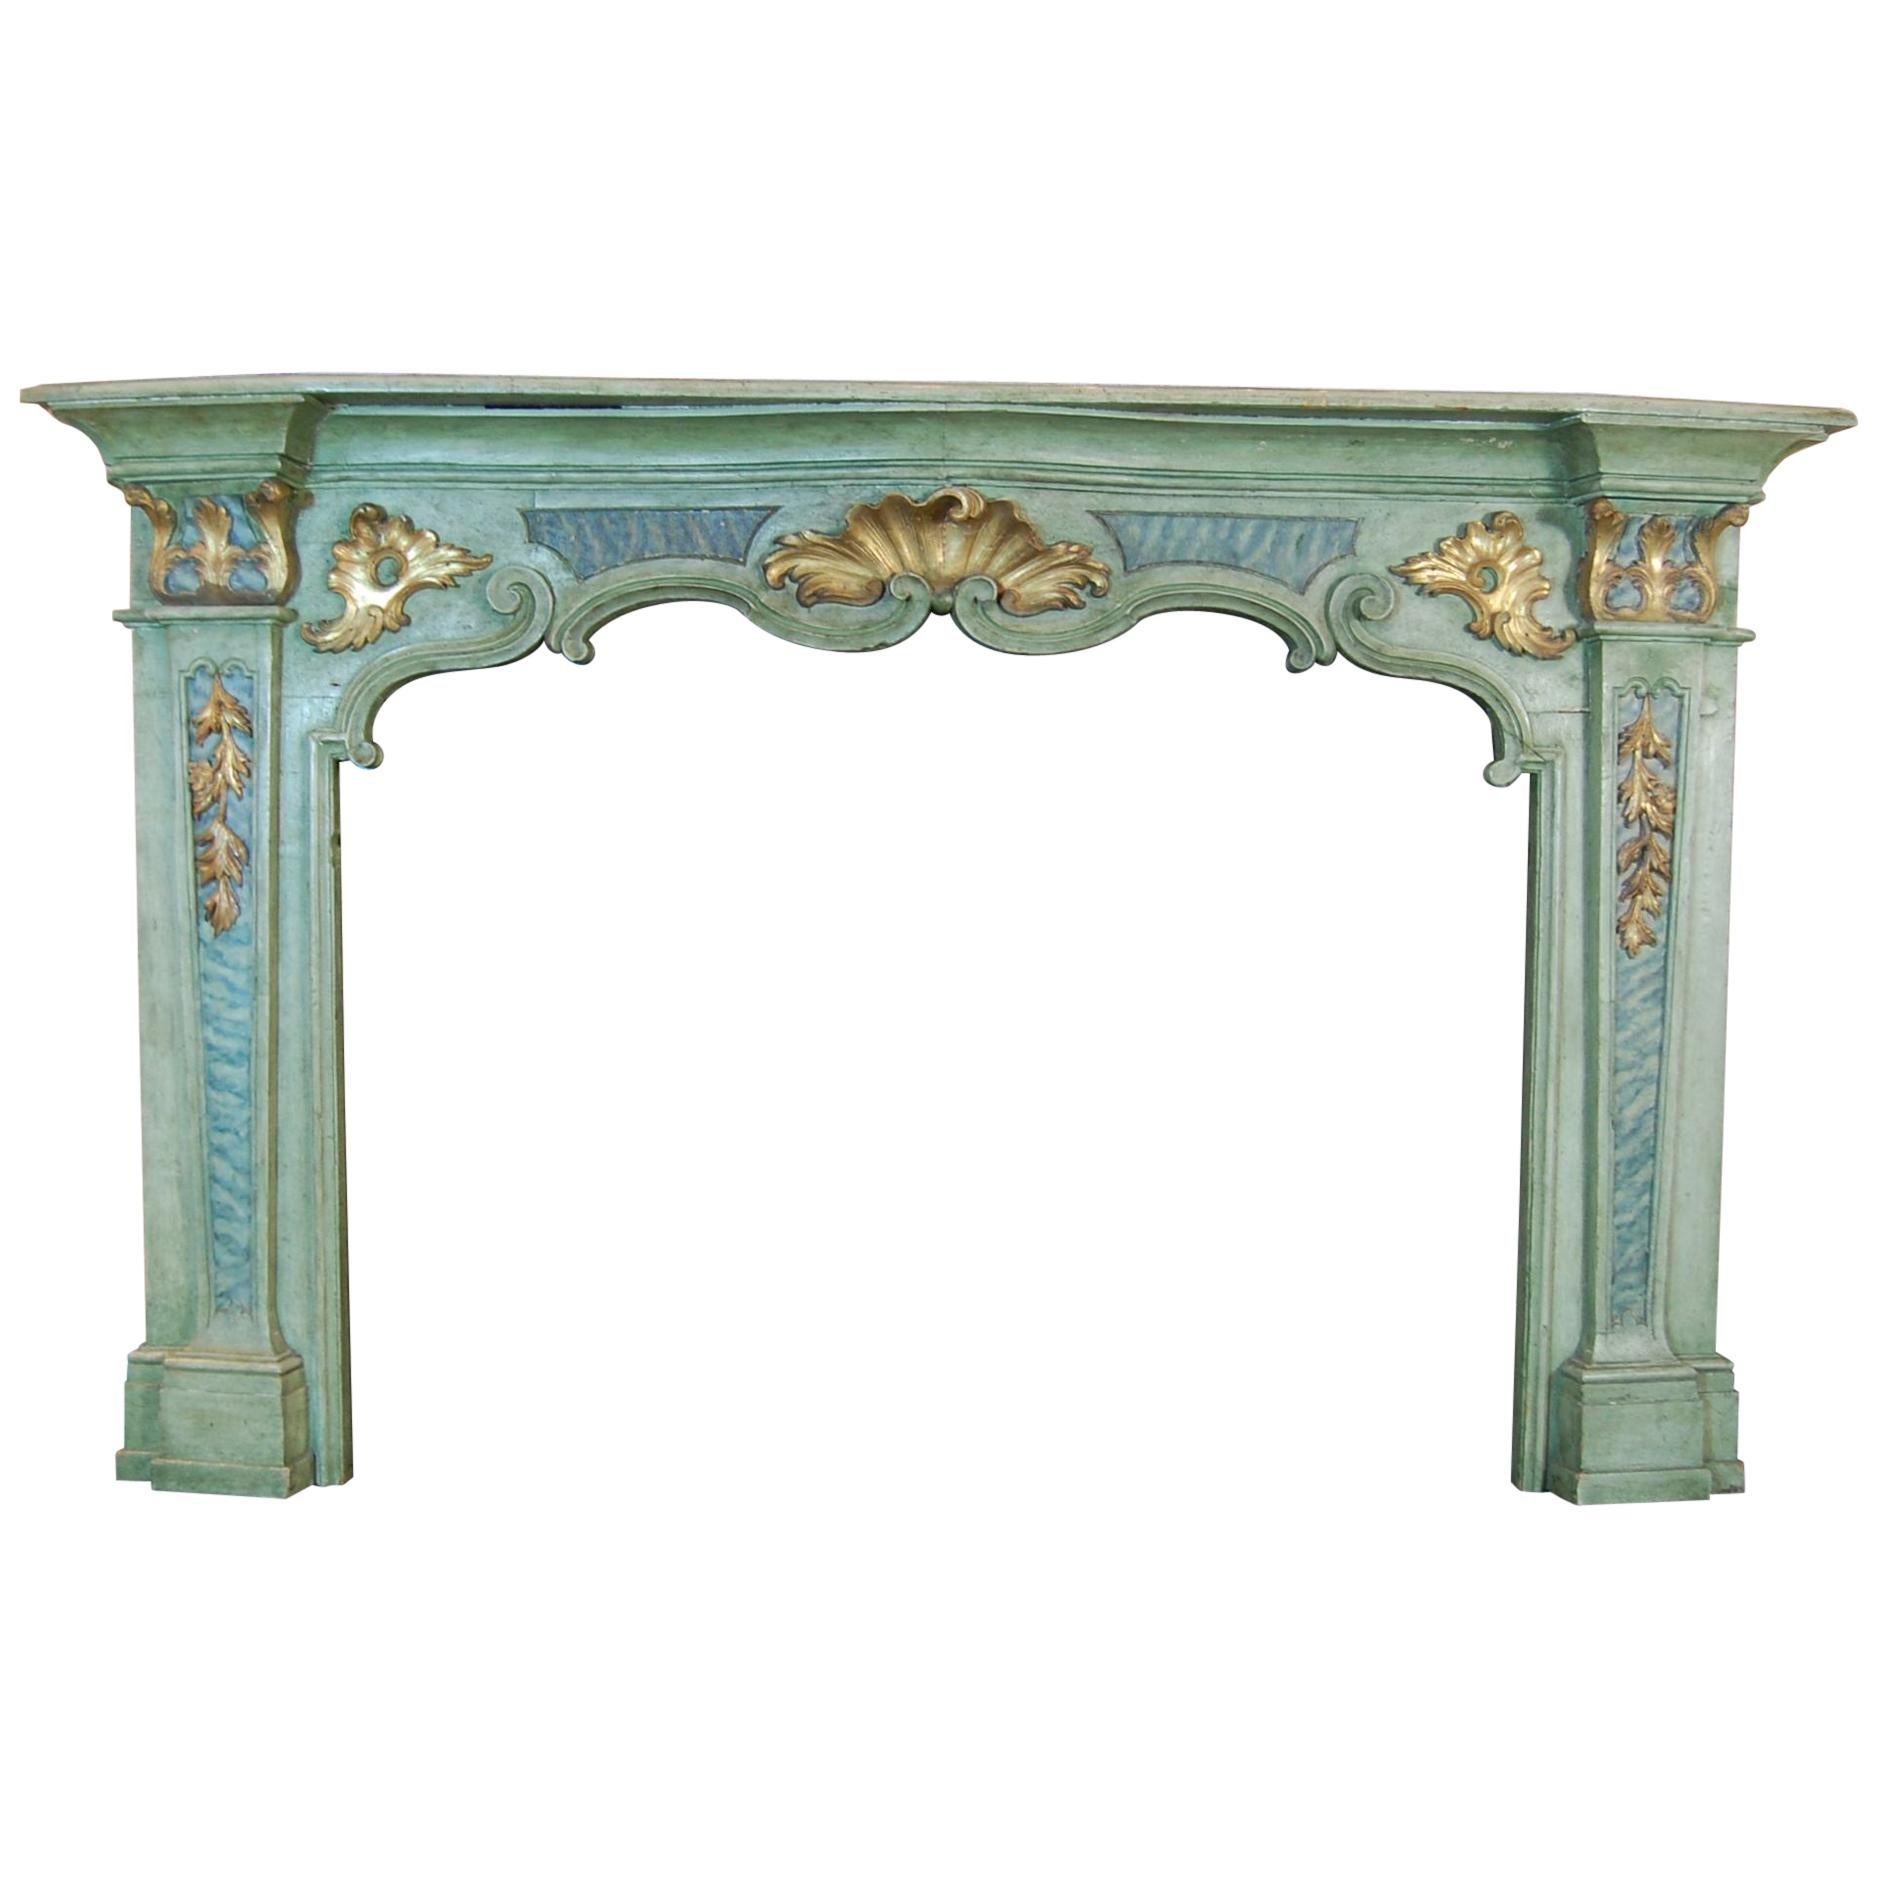 Louis XV Period Painted Mantel in Original Green Paint and Gold Leaf Mid-18th C. For Sale